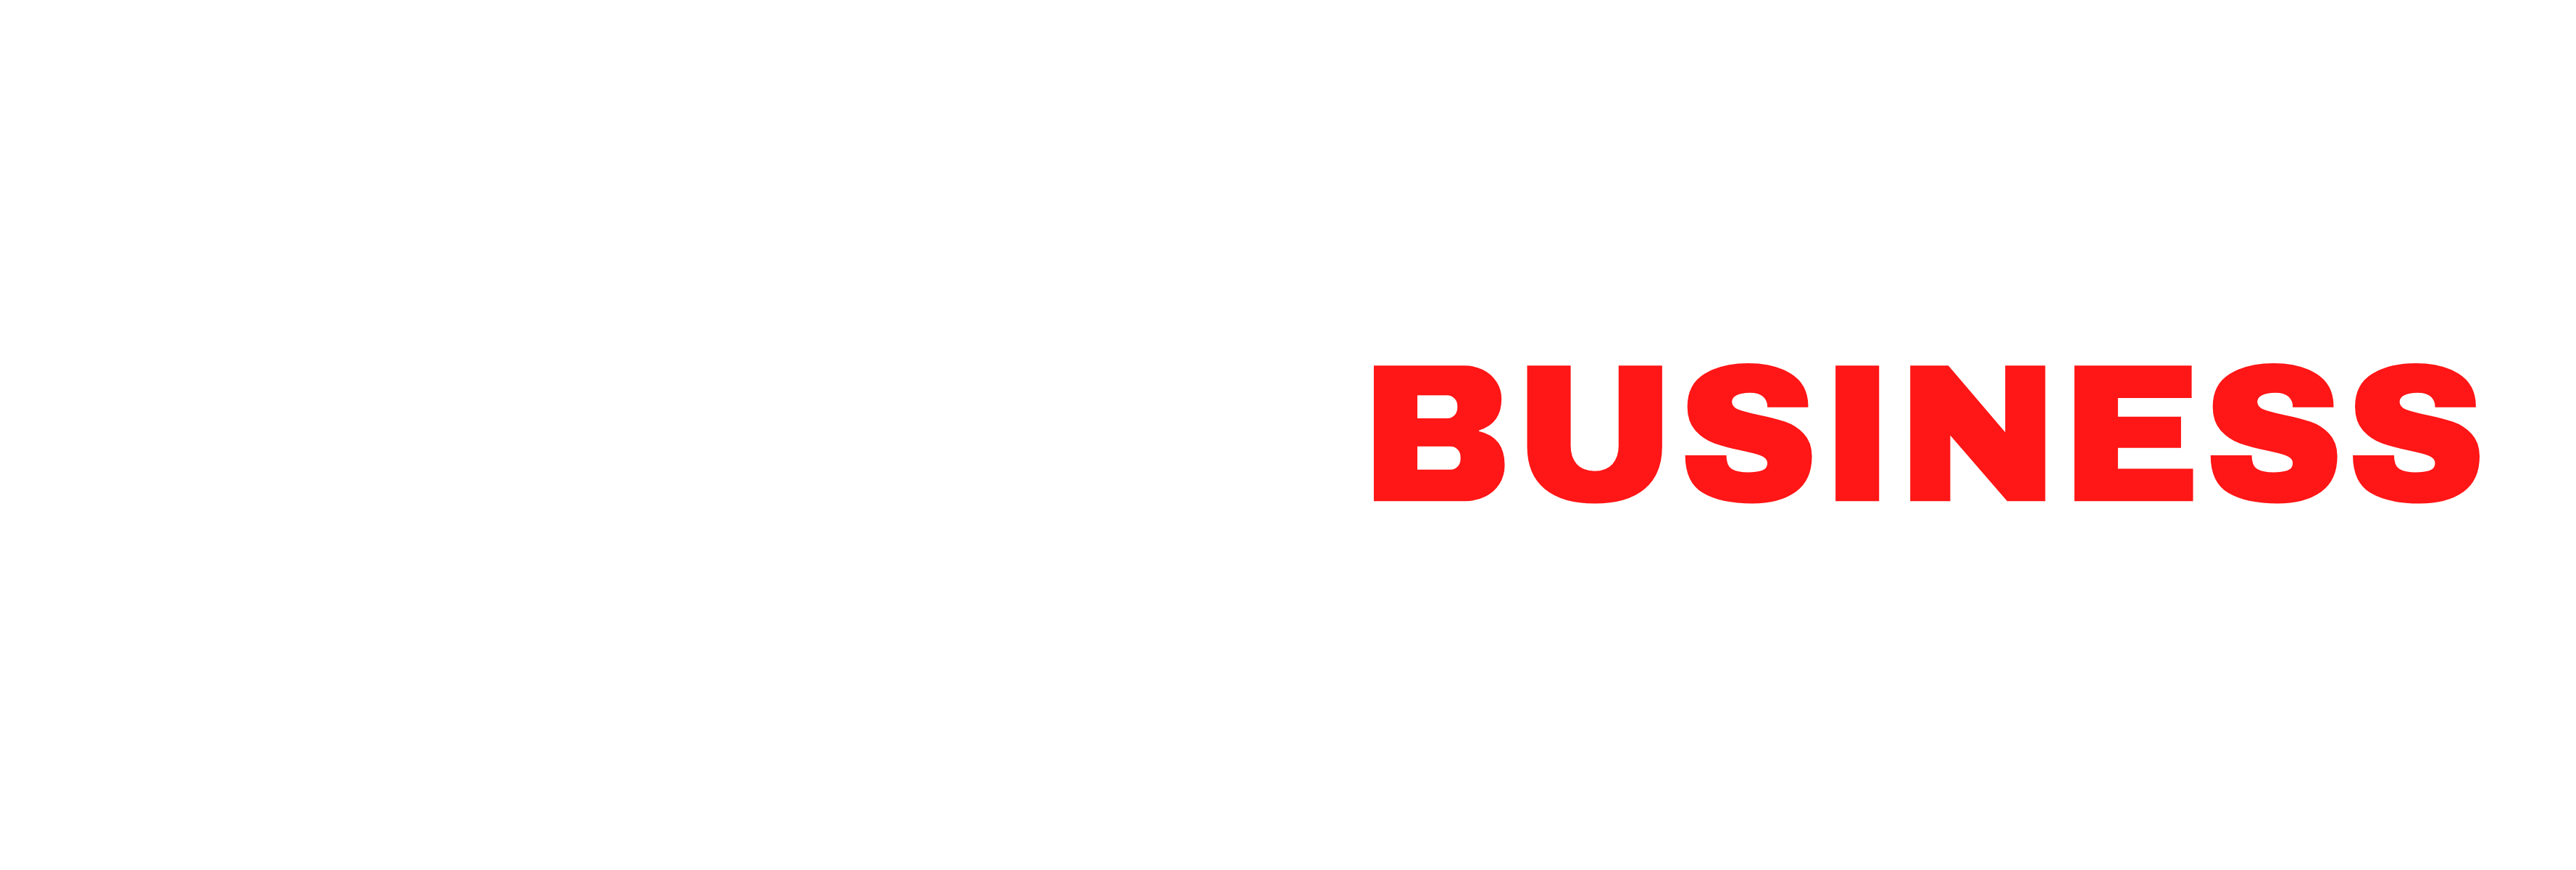 The Direct Business Images